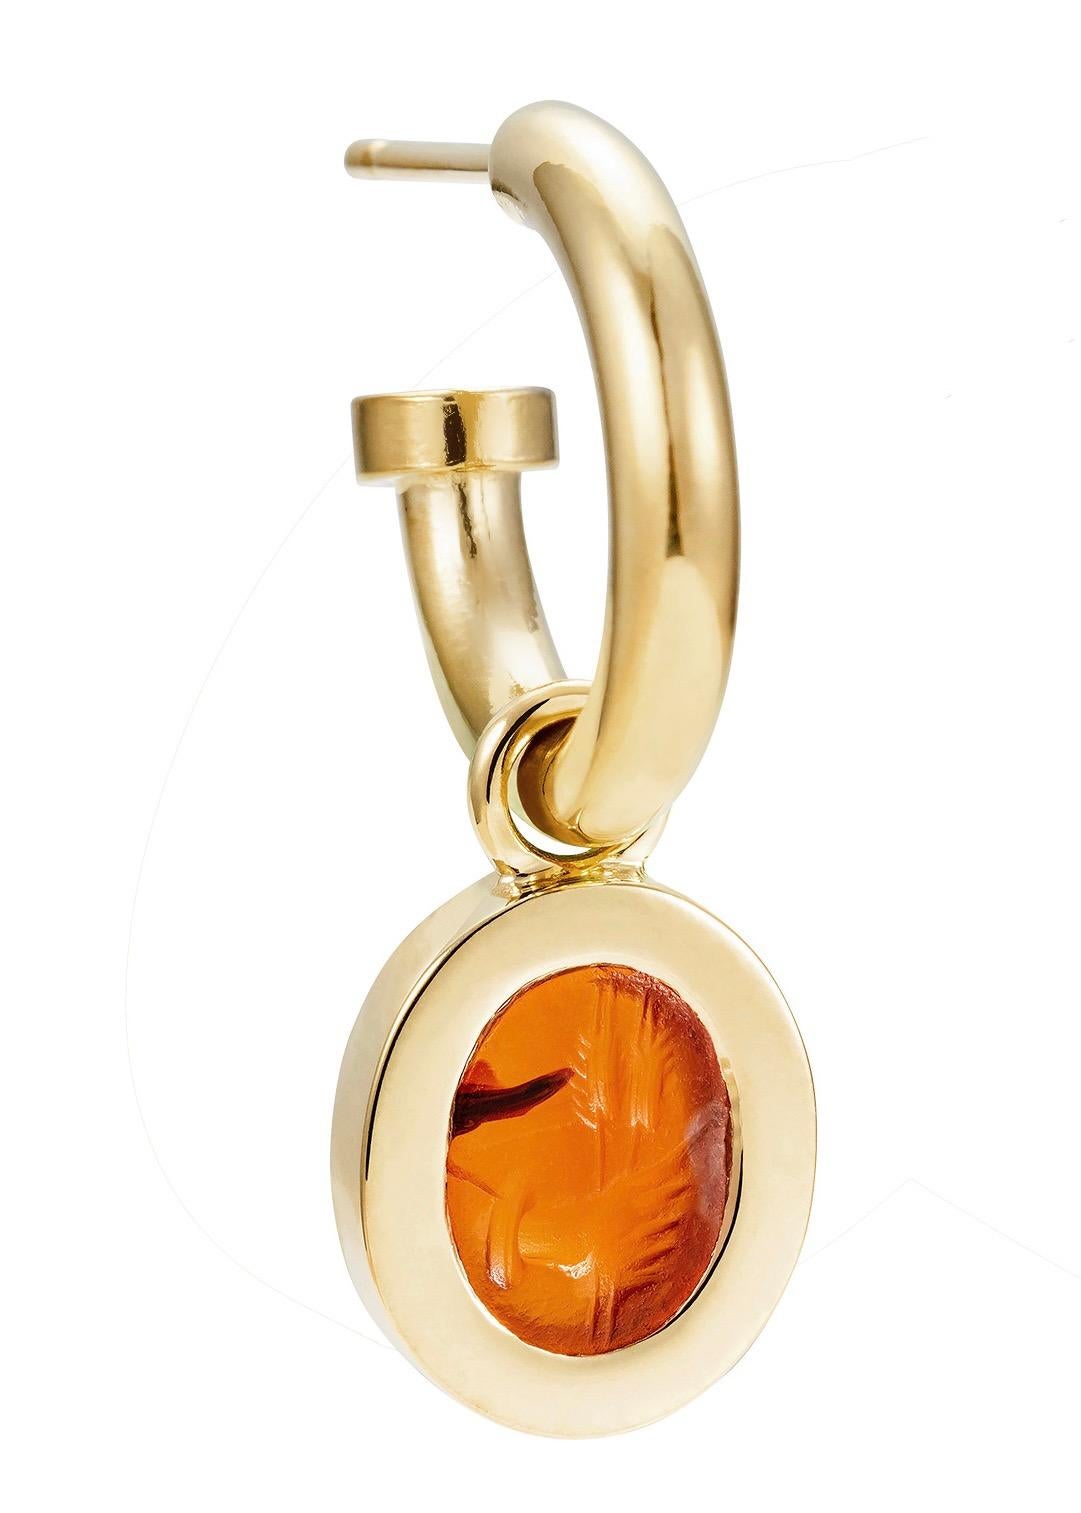 Victoria Strigini (b. 1991) 

An arresting pair of contemporary 18k yellow gold hoop earrings, with a single charm featuring an ancient Roman intaglio from the 2nd – 3rd century AD, in carnelian. The carnelian intaglio, in a bold and luminous